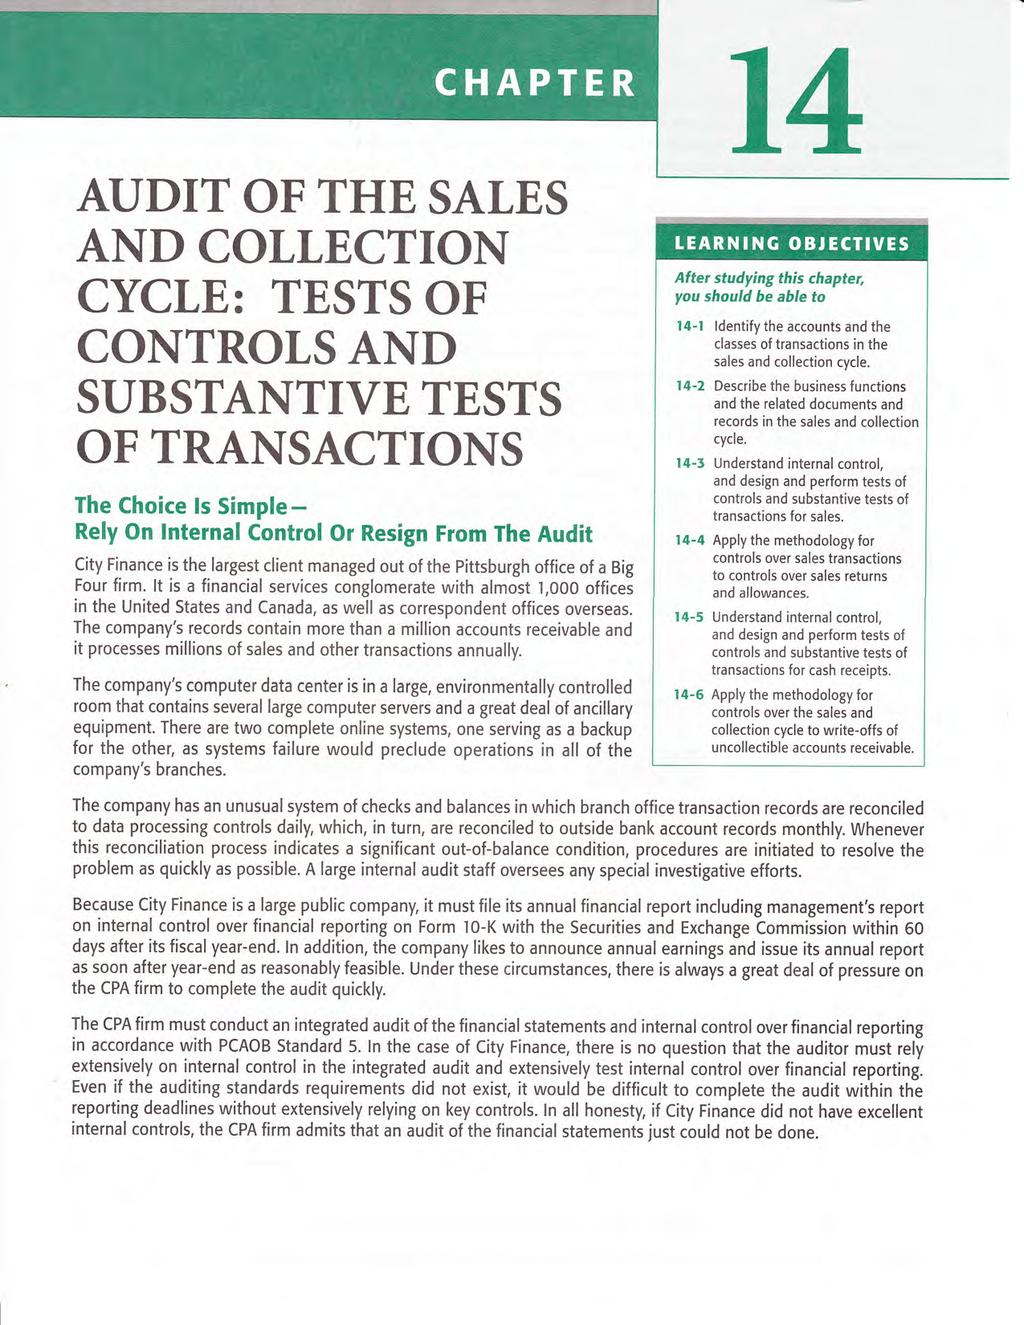 AUDIT OF THE SATES AND COLLECTION CYCLE: TESTS OF CONTROLSAND SUBSTANTIVE TESTS OF TRANSACTIONS The Choice ls Simple - Rely On lnternal Control Or Resign From The Audit city Finance is the largest